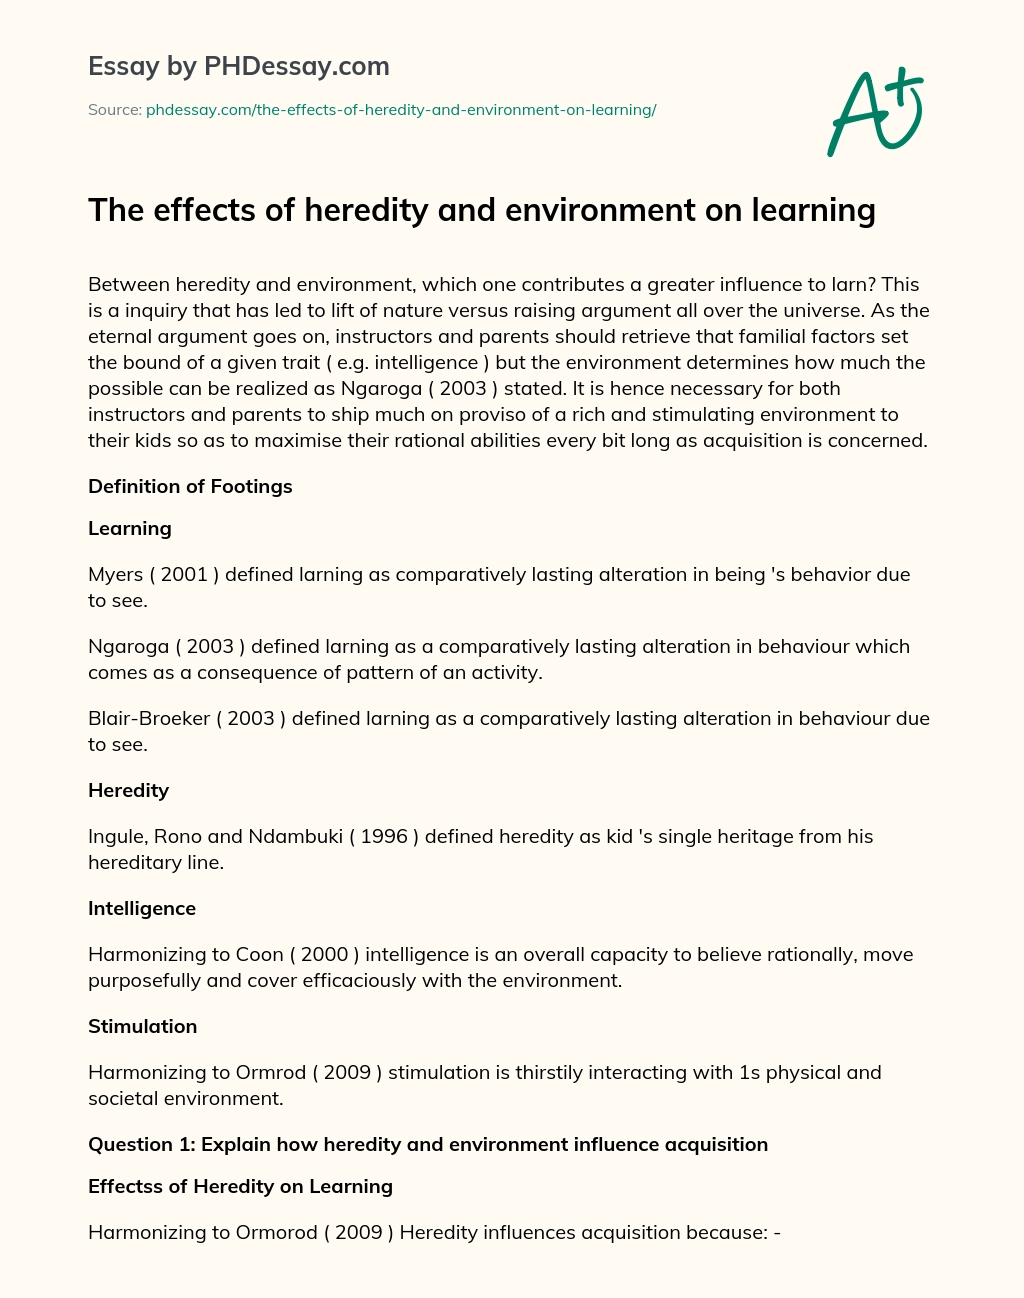 The effects of heredity and environment on learning essay